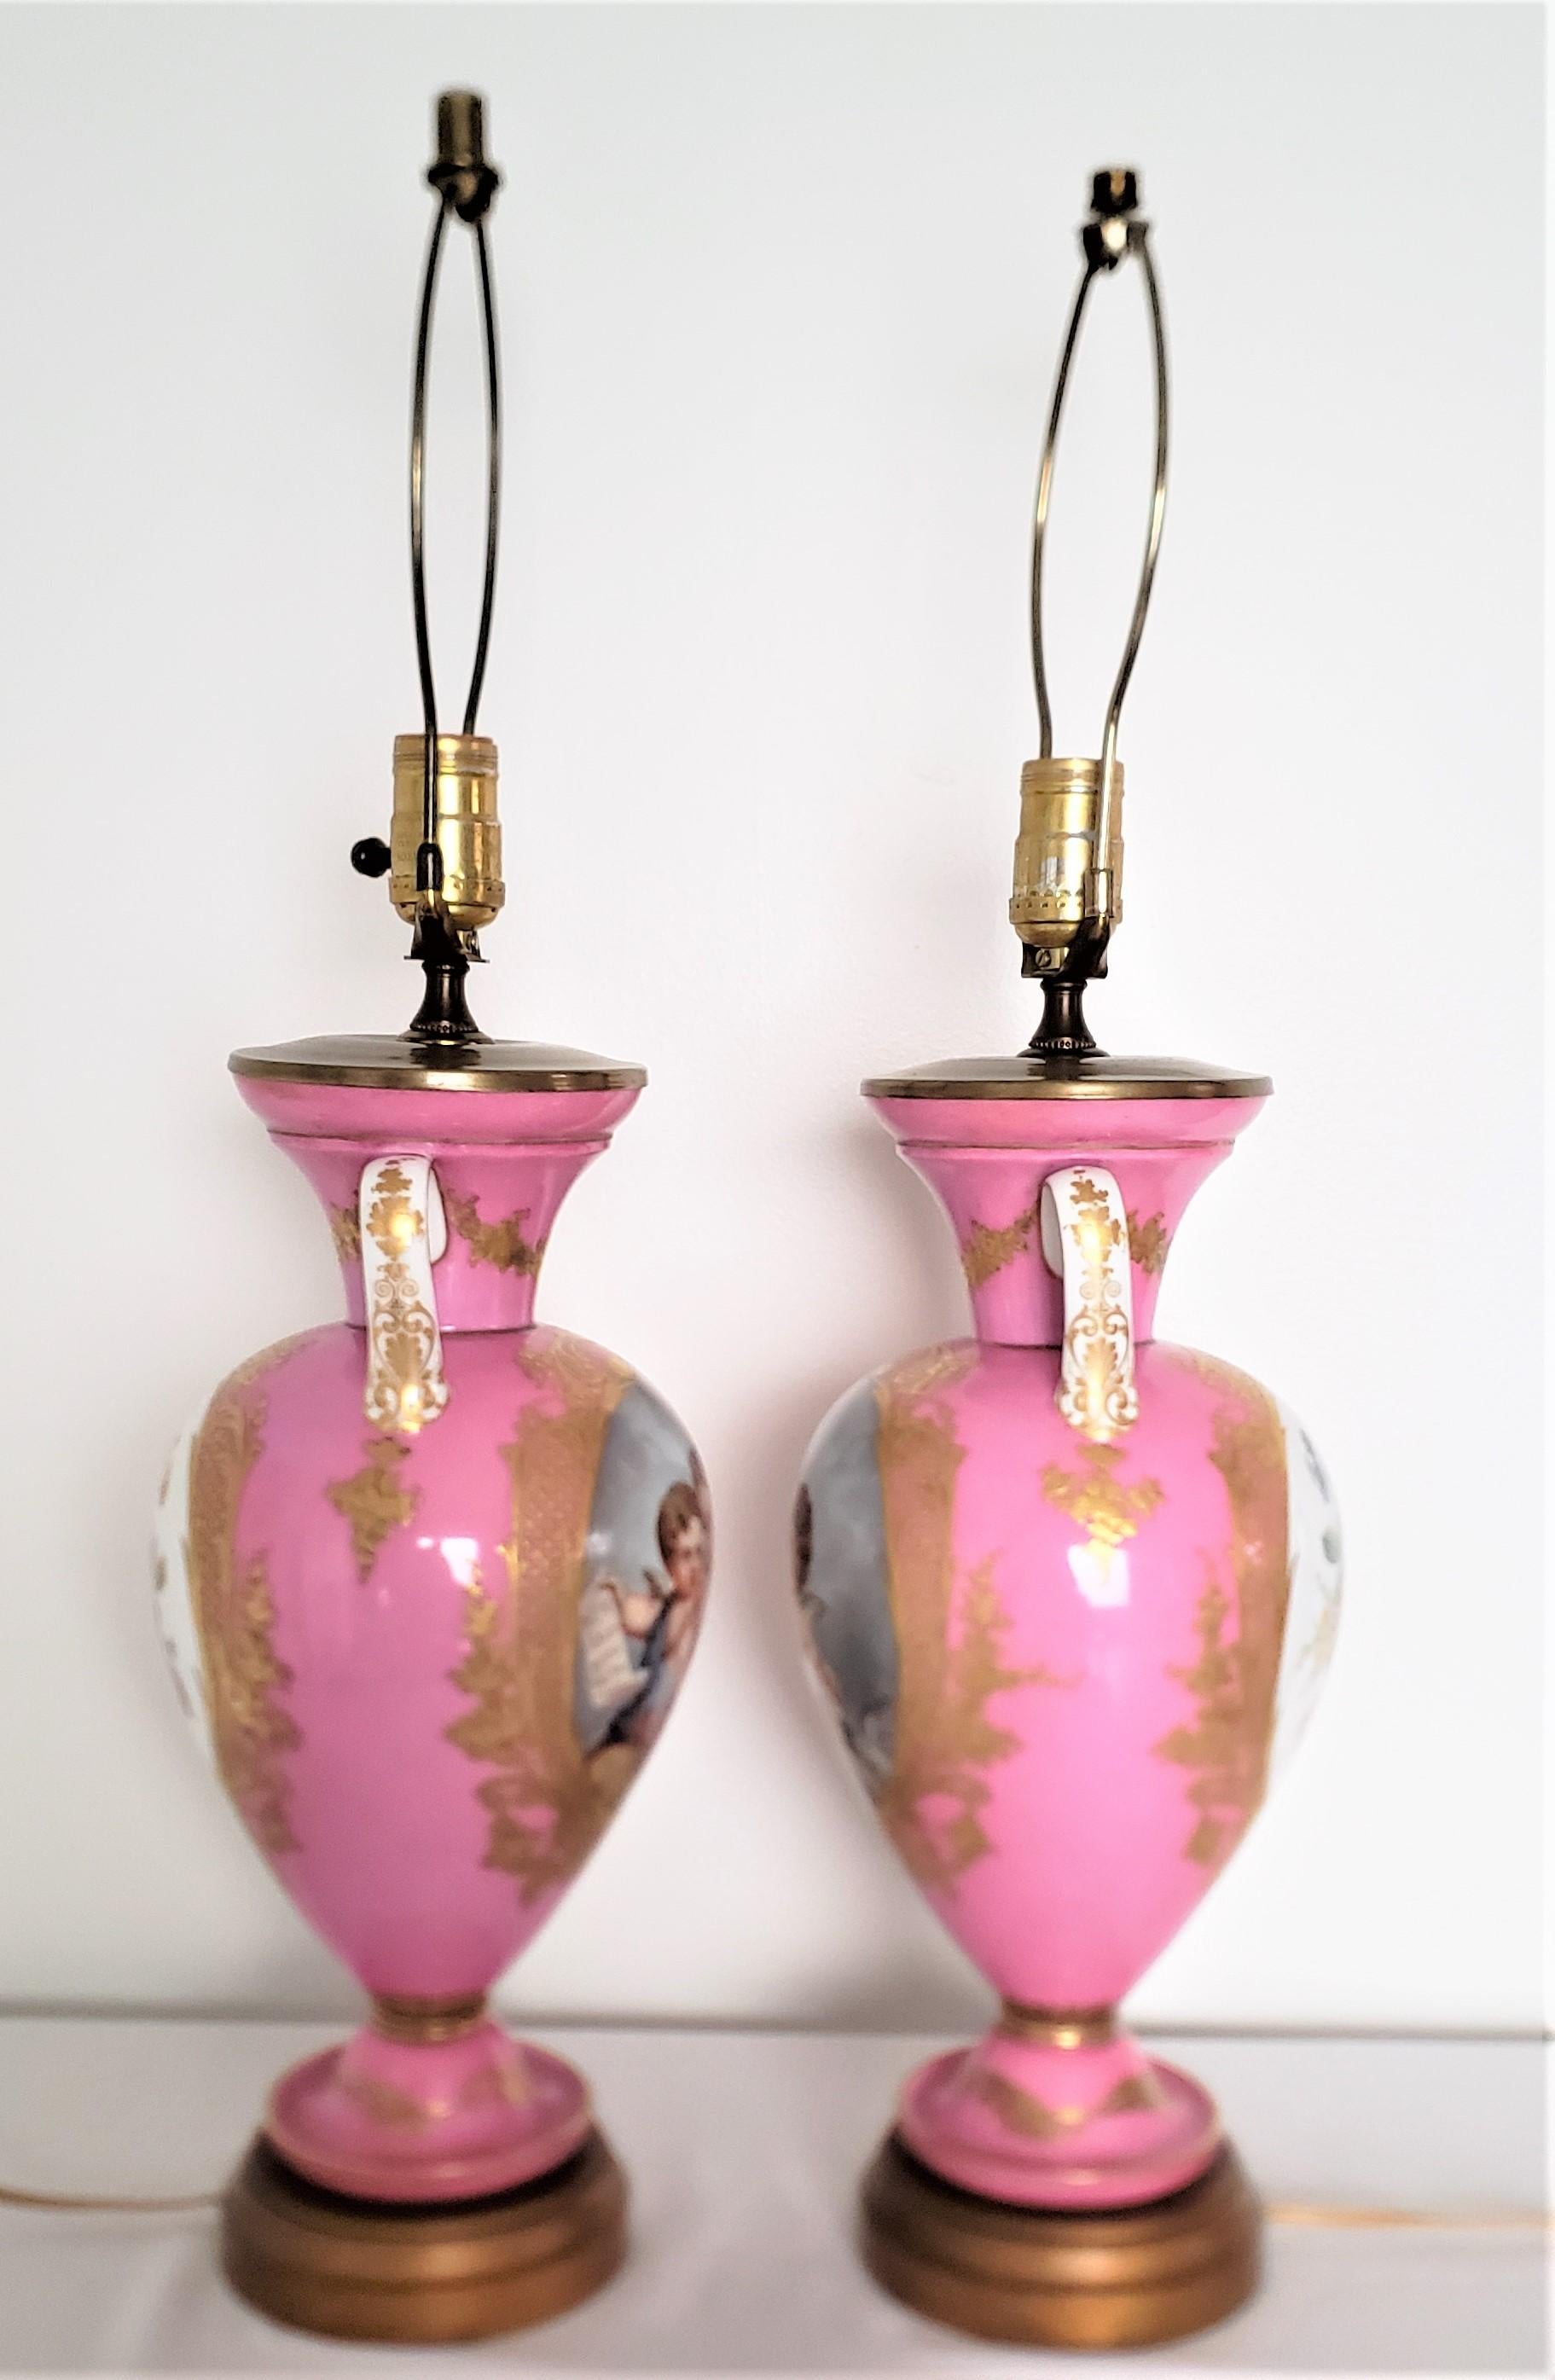 19th Century Pair of Antique French Sevres Style Hand-Painted Porcelain Pink Table Lamps 